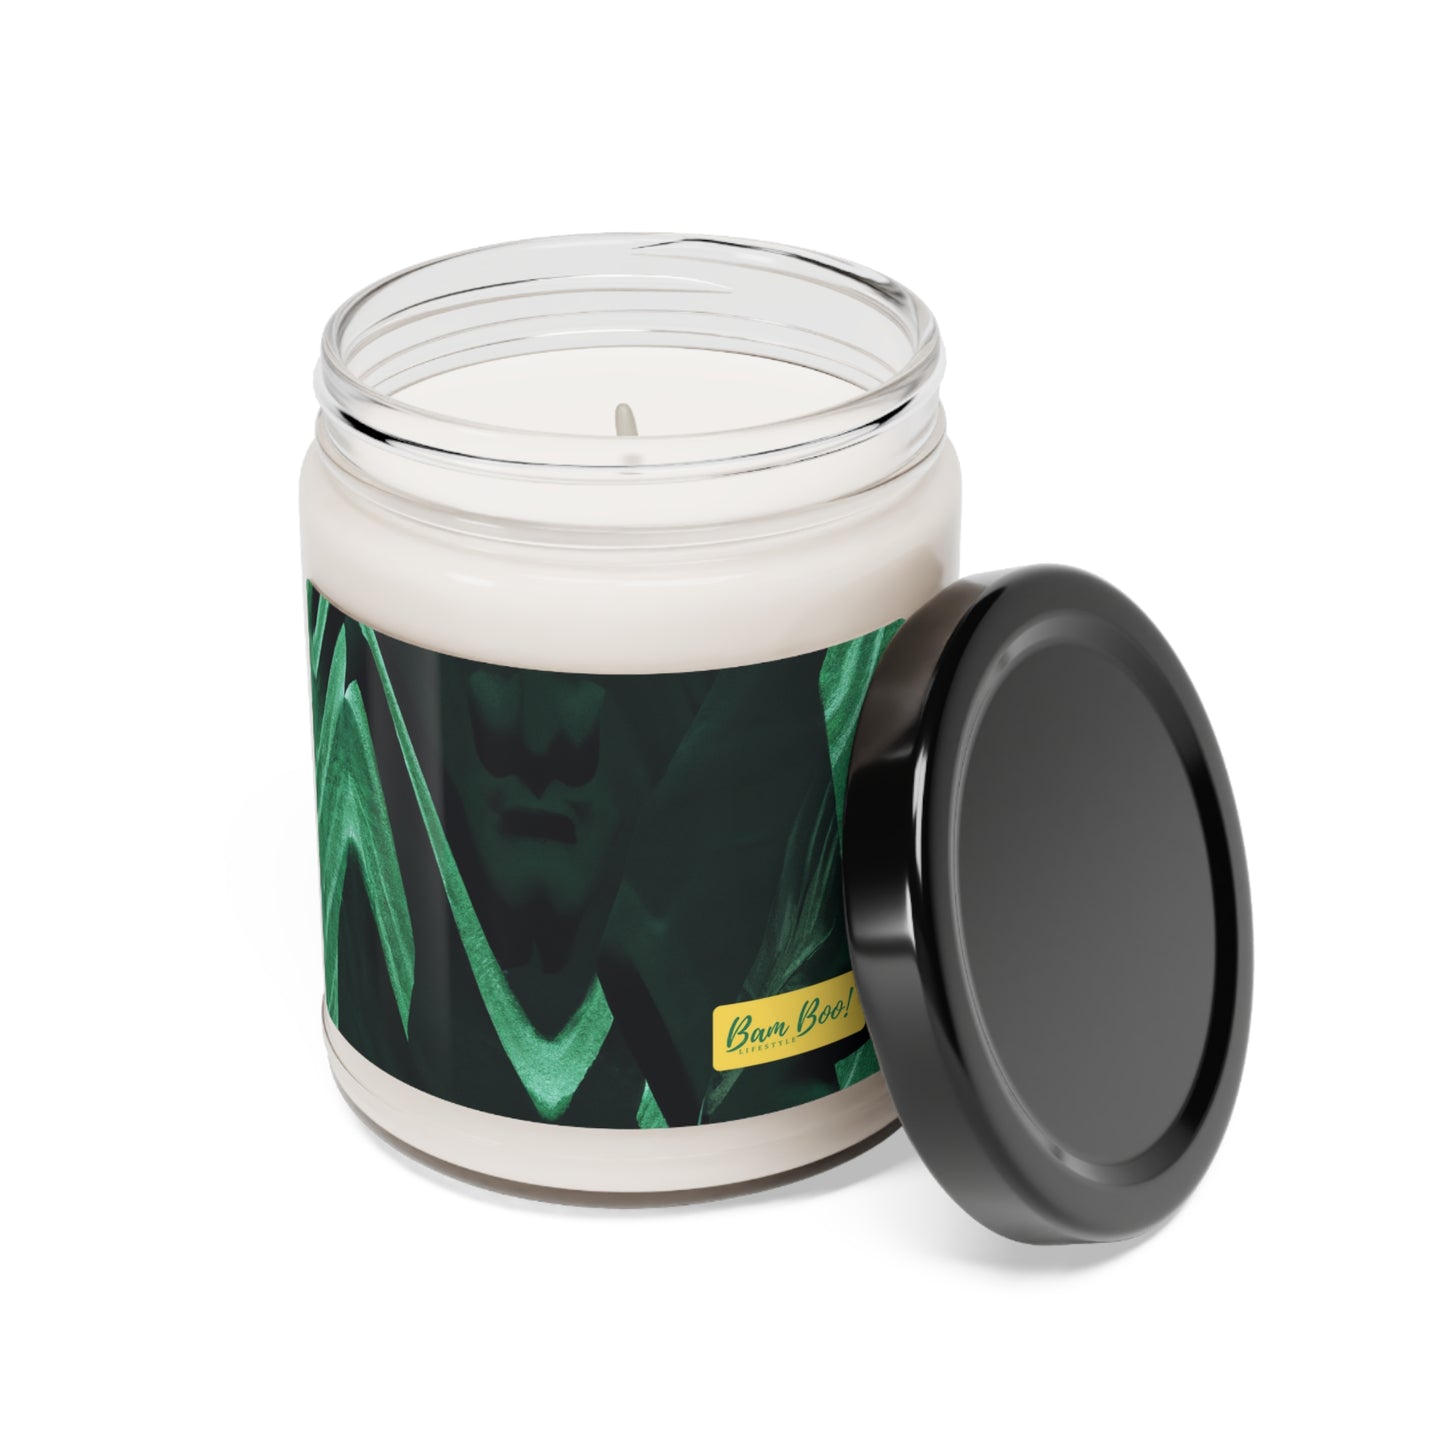 "The Splendor of Nature: An Artistic Fusion of Color, Shape, and Texture" - Bam Boo! Lifestyle Eco-friendly Soy Candle